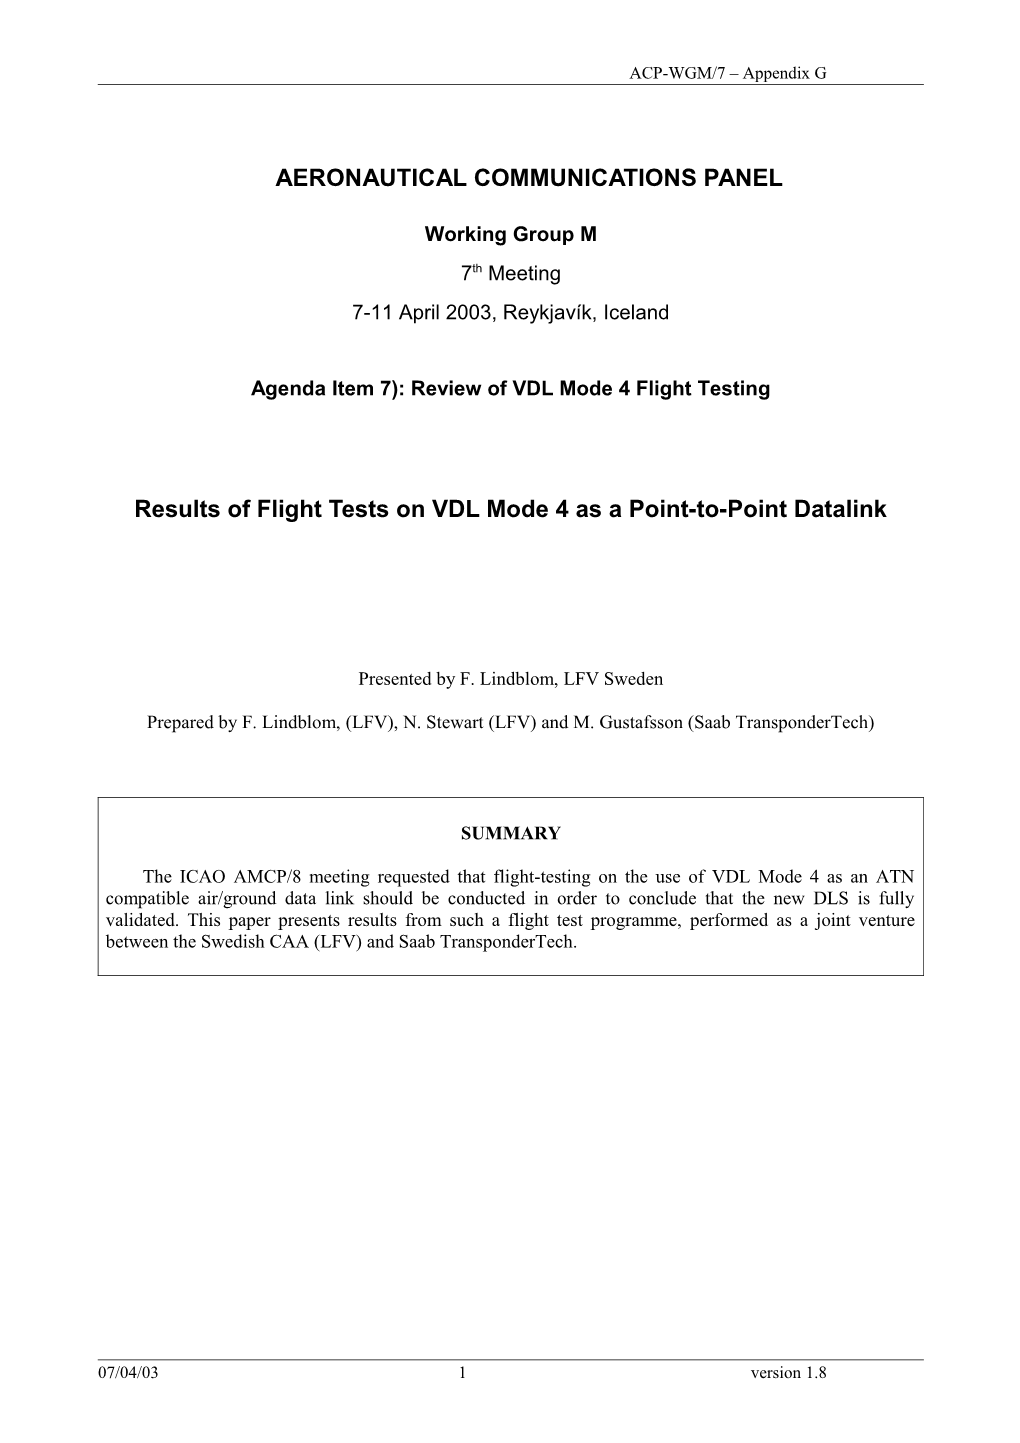 Results of Flight Tests on VDL Mode 4 As a Point-To-Point Datalink